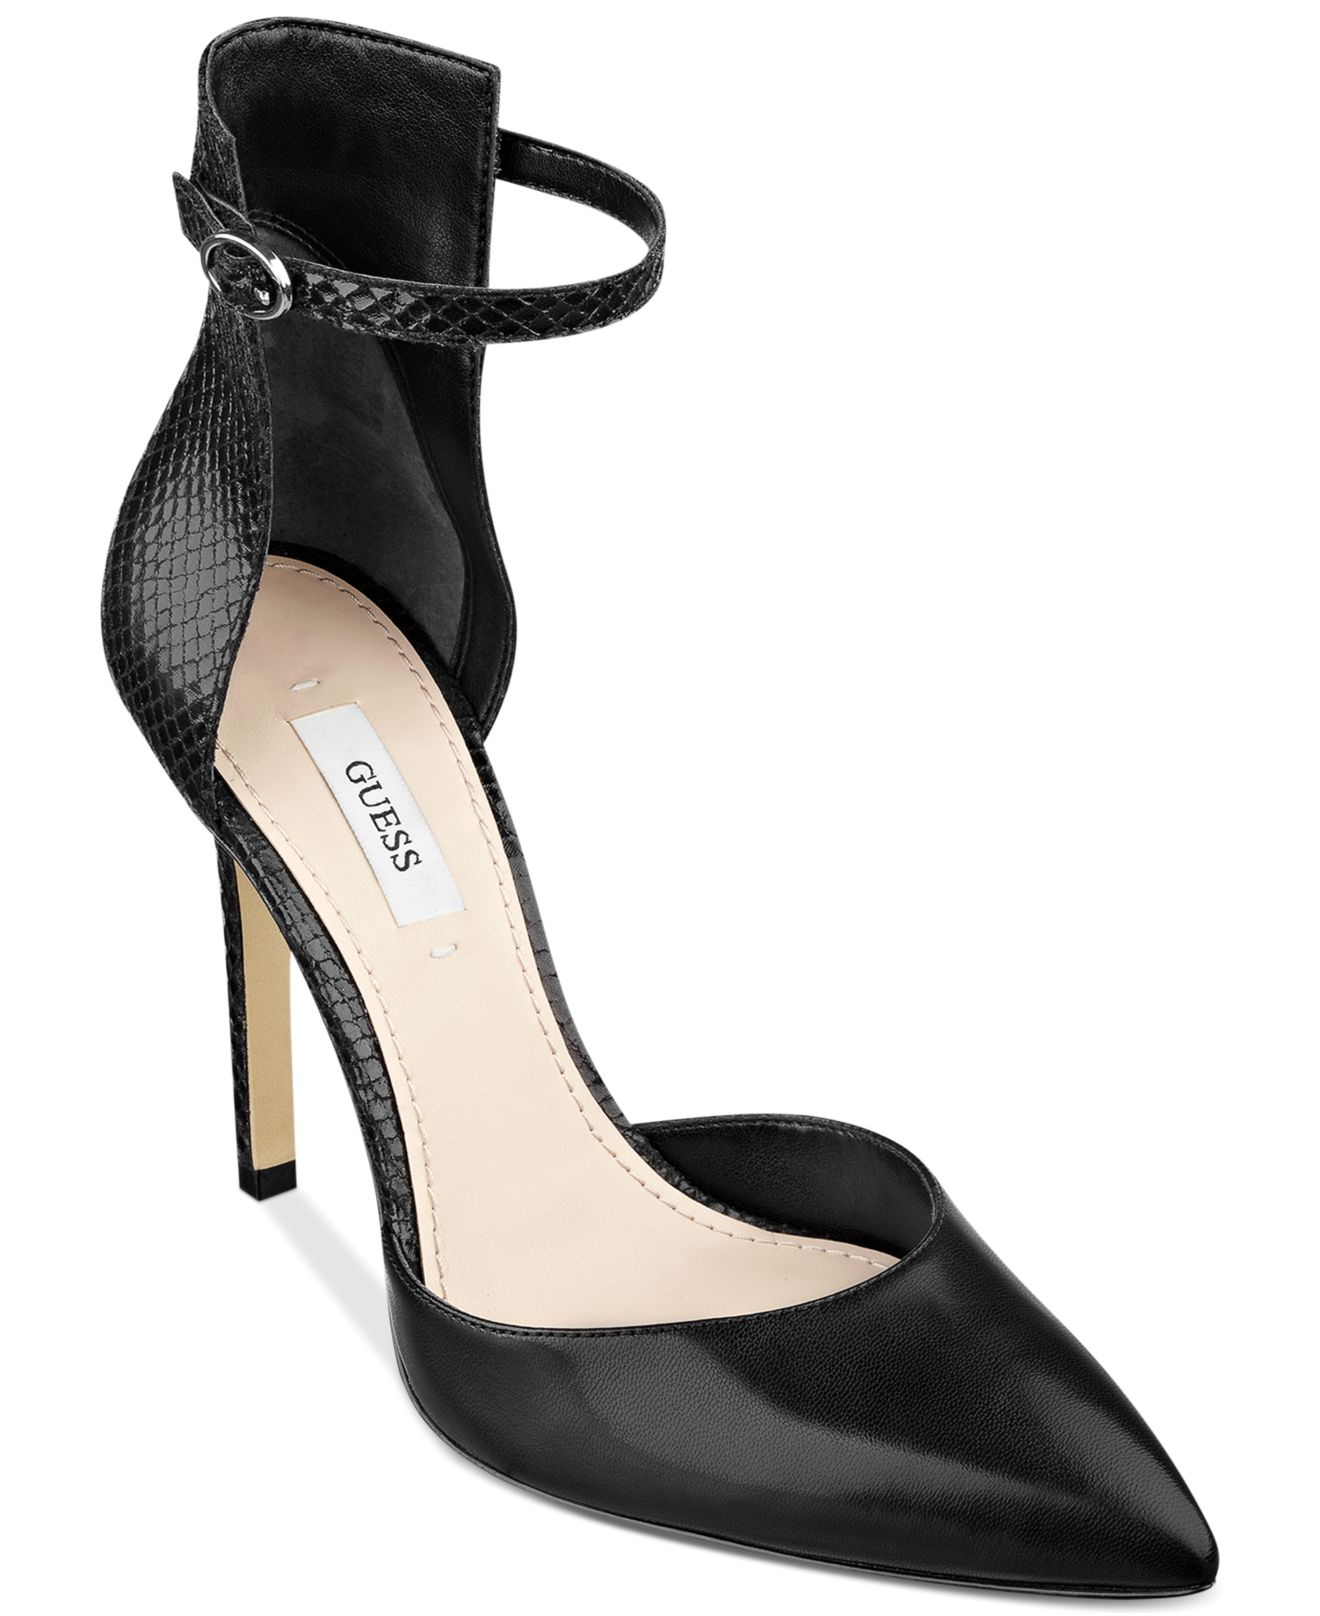 Lyst - Guess Abaih Two Piece Ankle Strap Pumps in Black